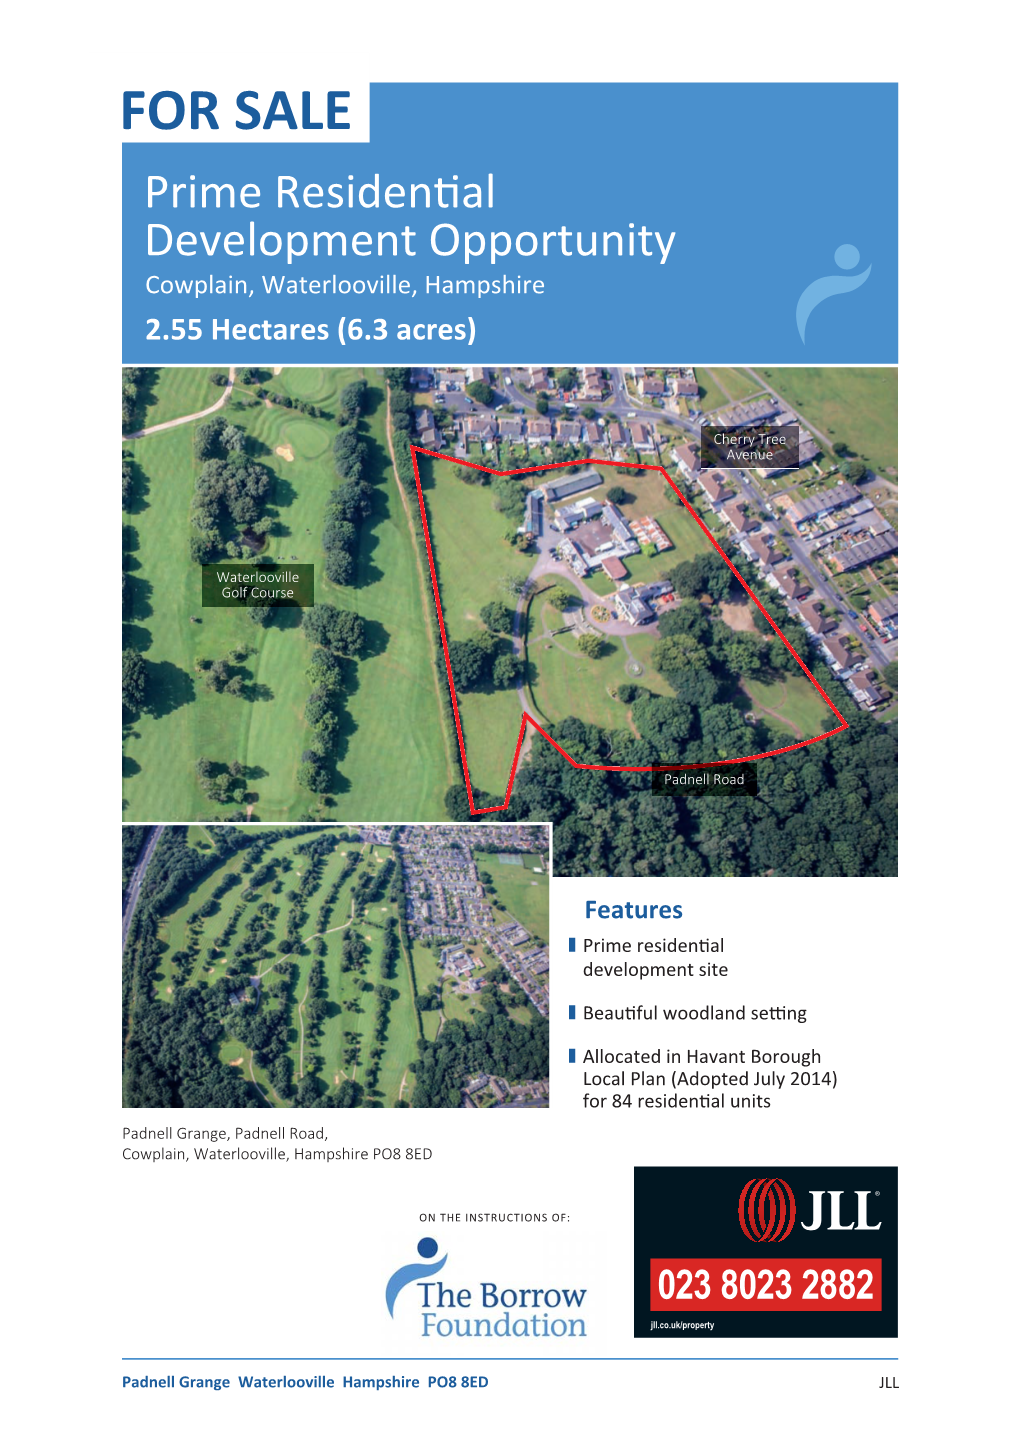 FOR SALE Prime Residential Development Opportunity Cowplain, Waterlooville, Hampshire 2.55 Hectares (6.3 Acres)